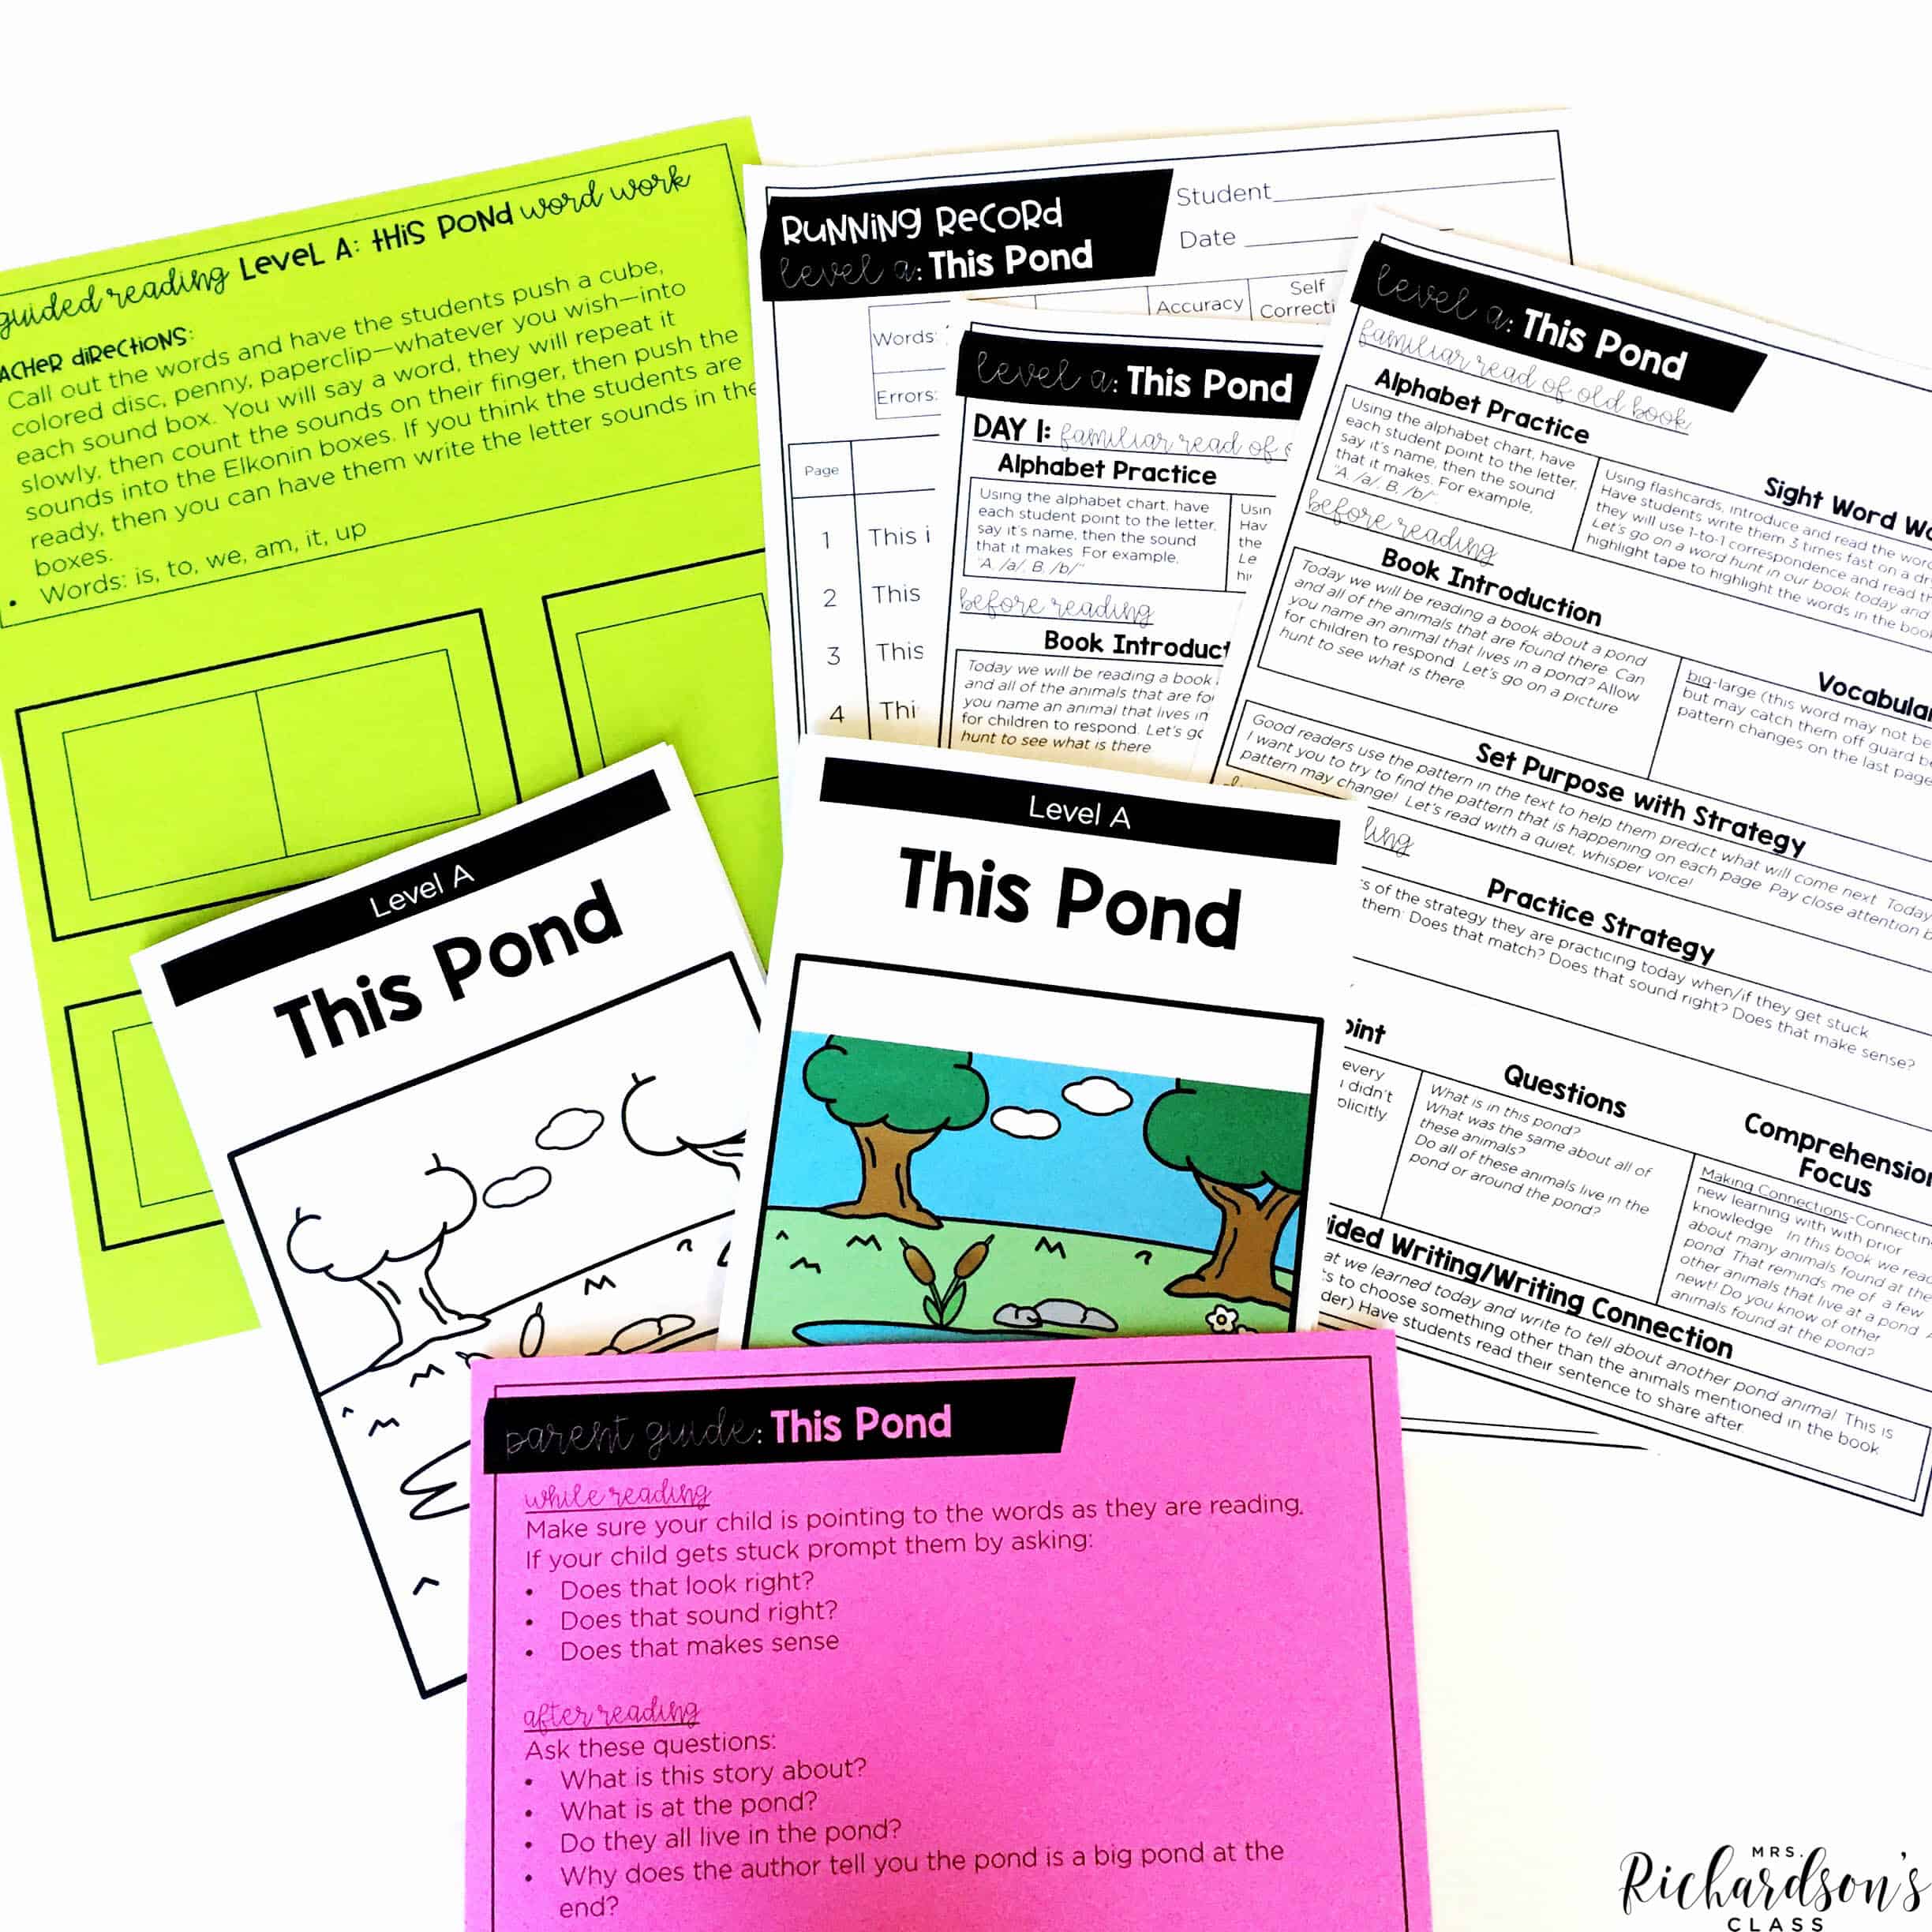 Starting guided reading can feel overwhelming, but it's made simple with this level A guided reading lesson.  It has everything you need for your level A readers!